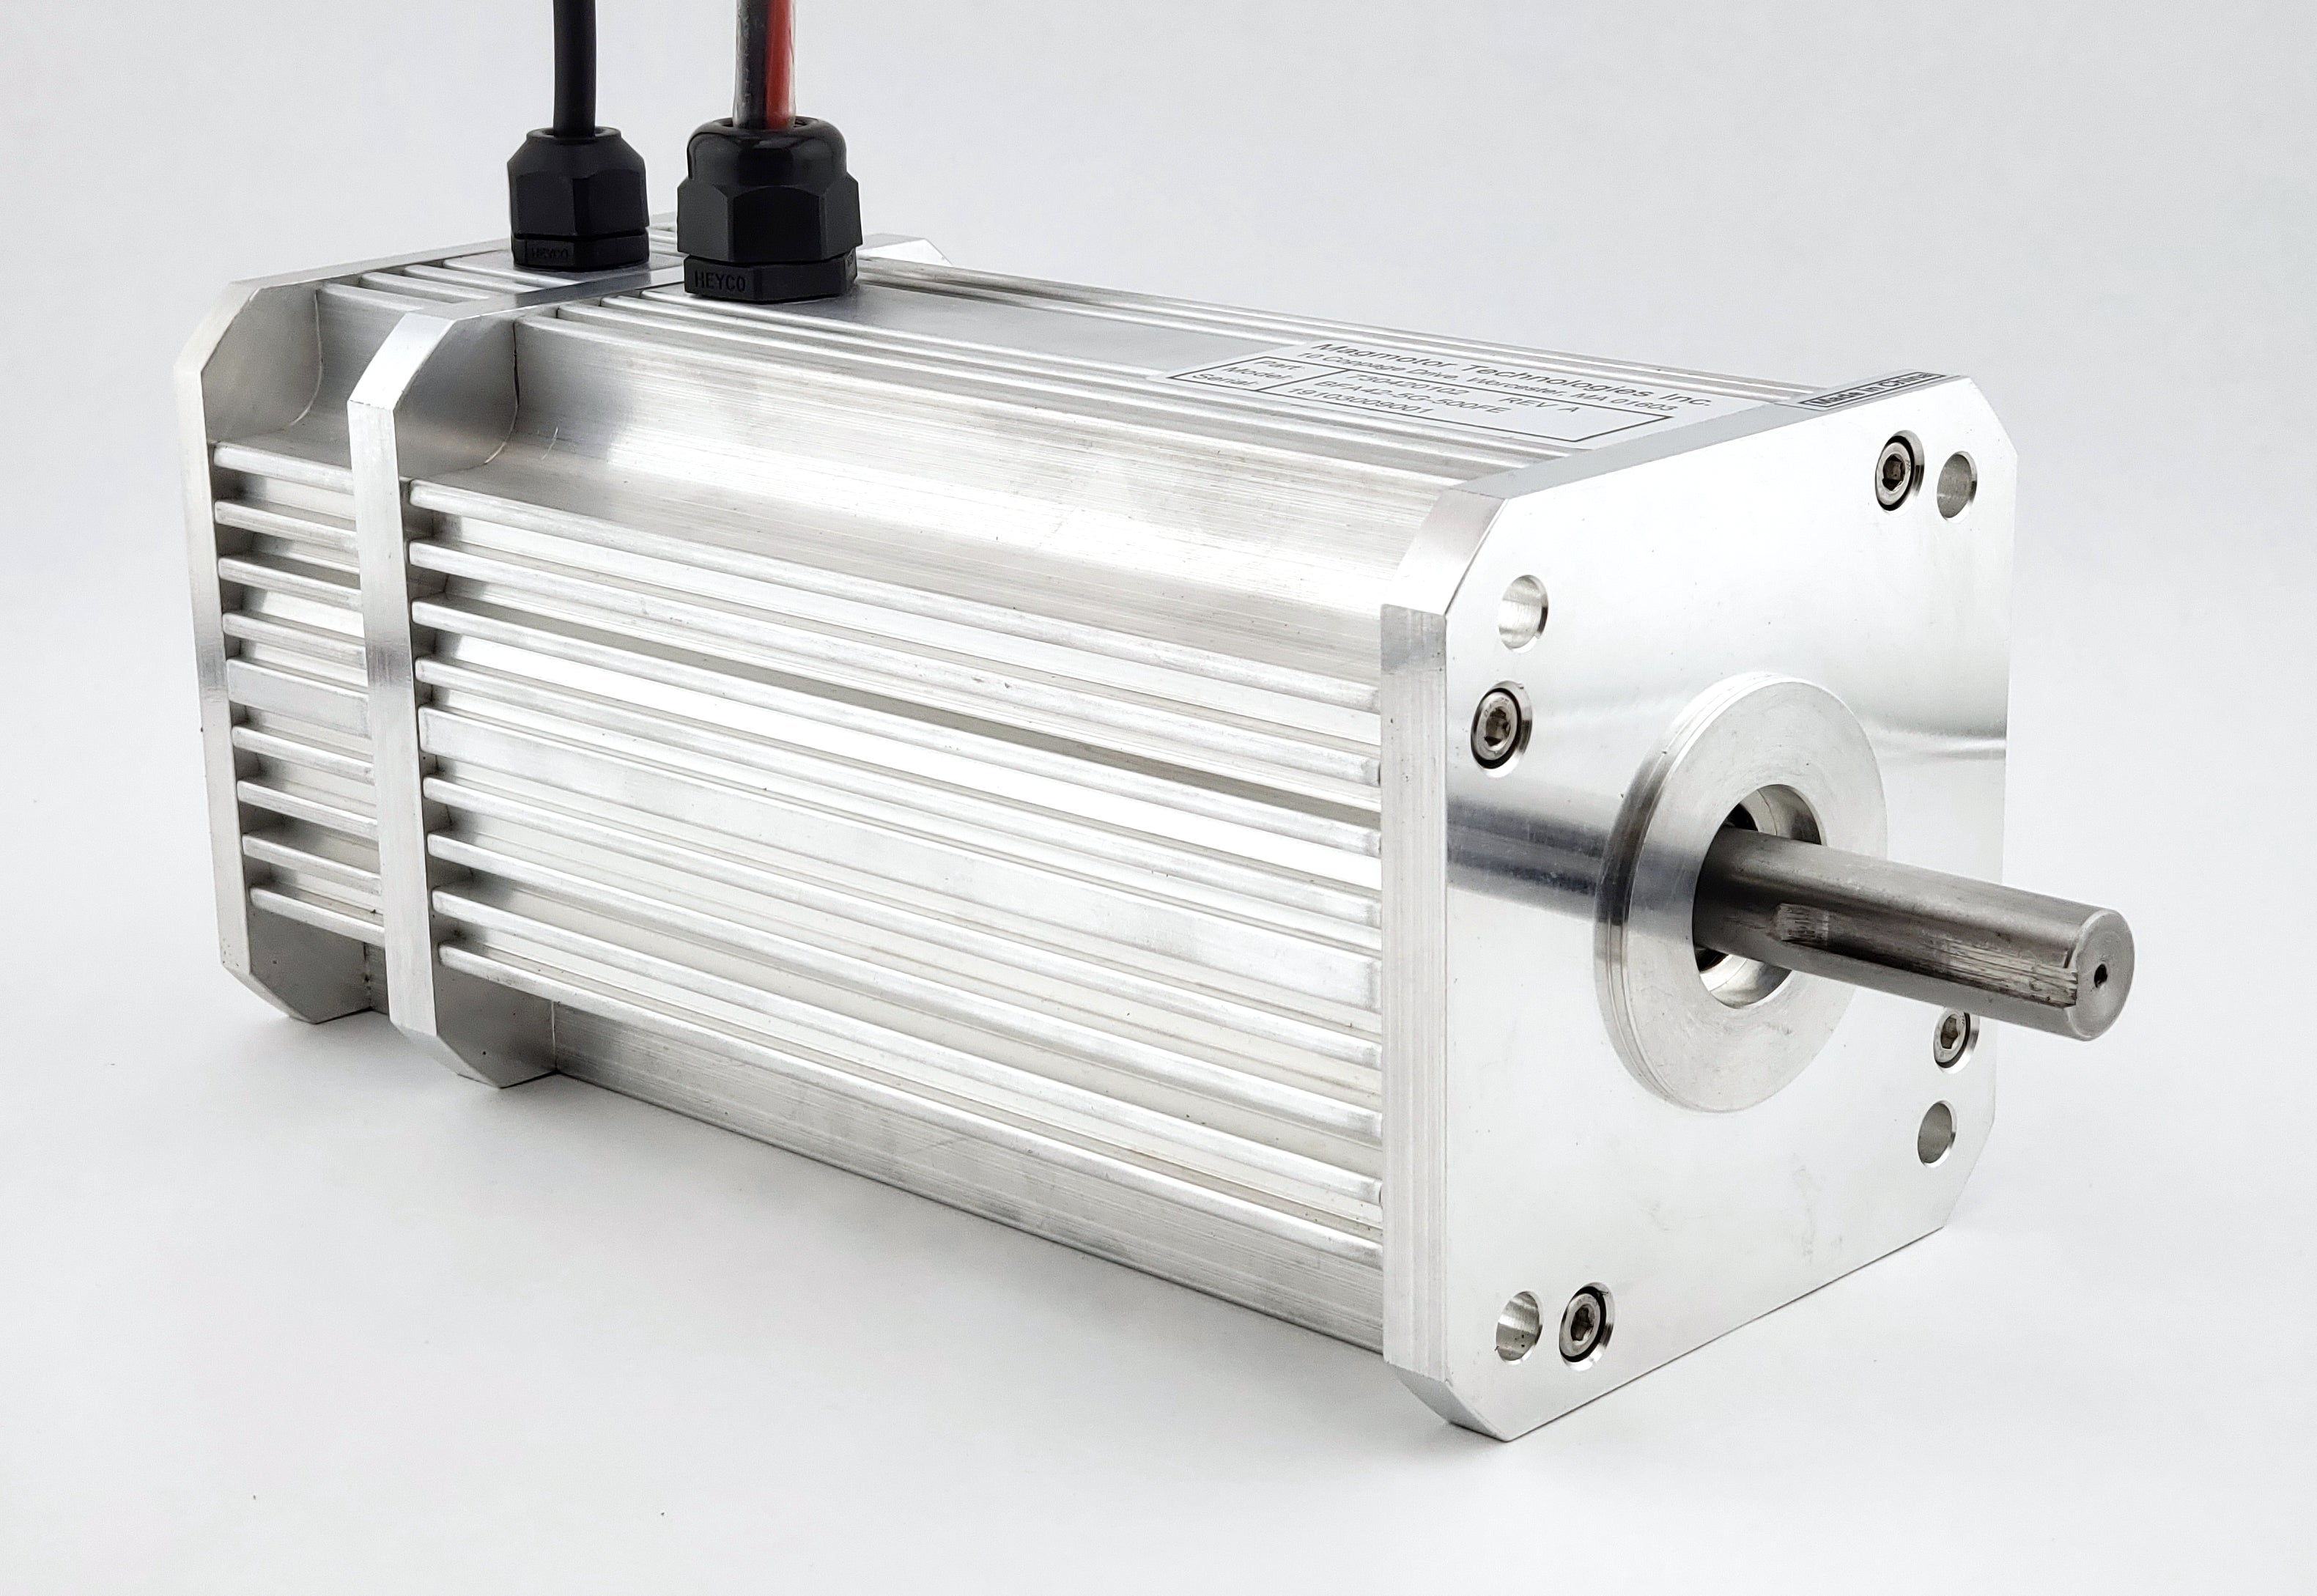 730420102 - BRUSHLESS MOTOR - 84 to 120 VDC - 1050 to 1125 oz-in Conti –  Magmotor Technologies Inc